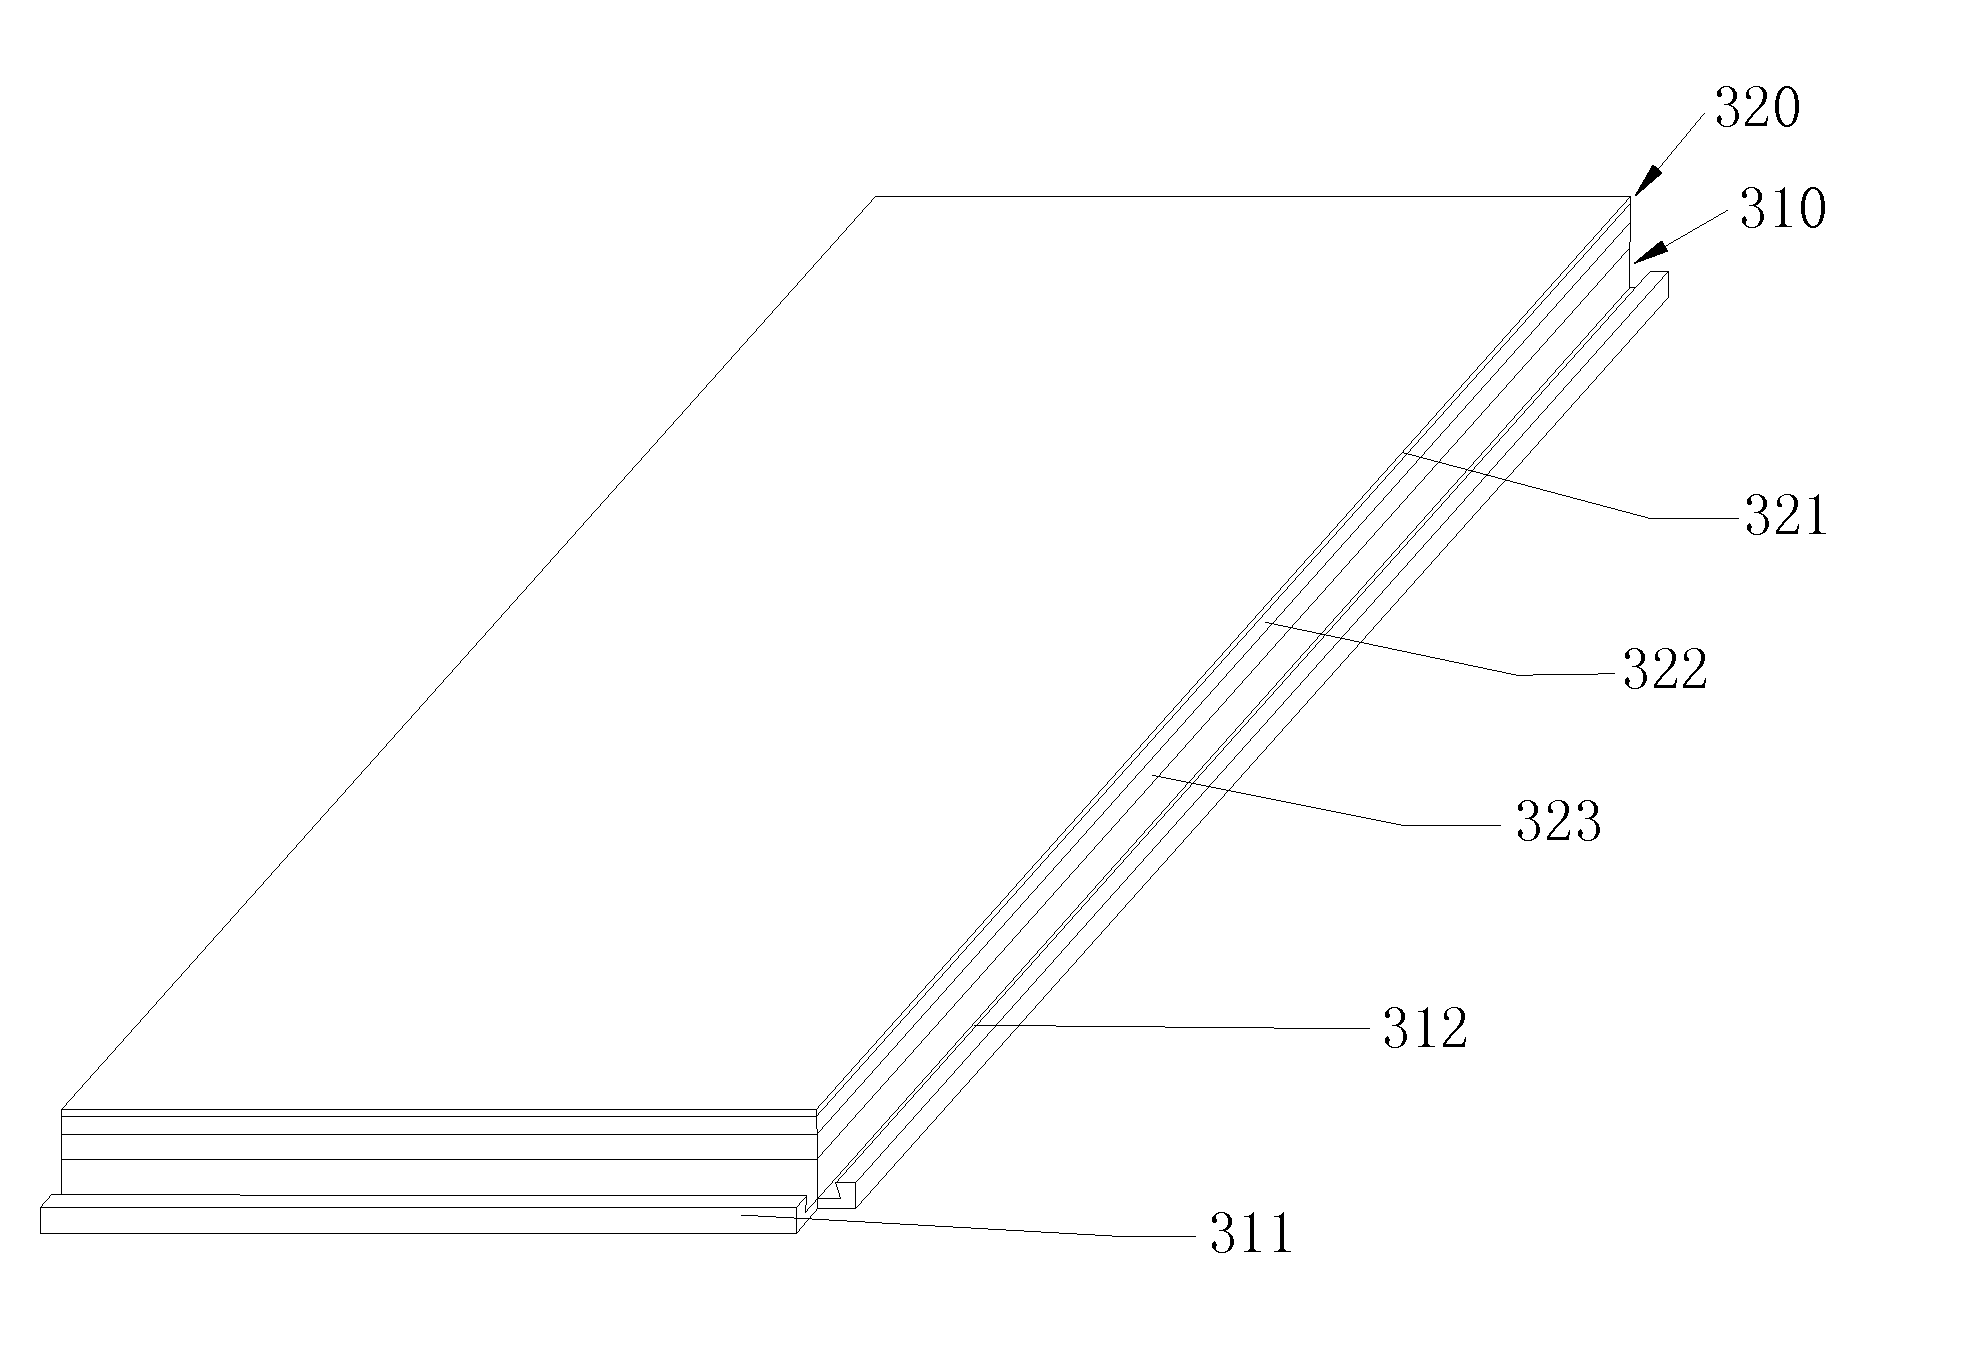 PVC composite material, foam board, production method and apparatus thereof, and flooring